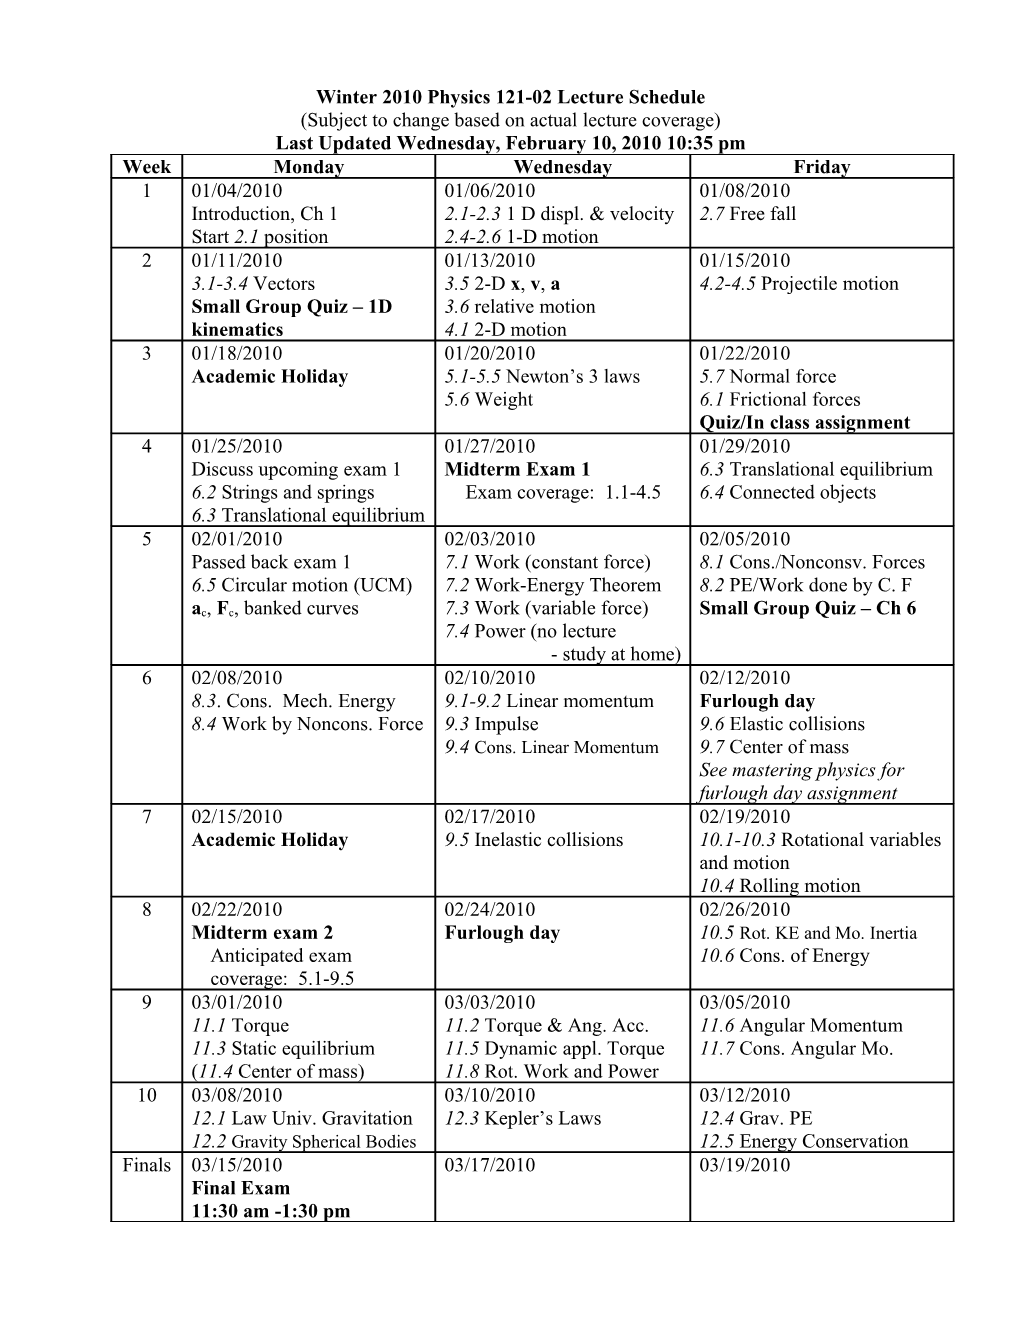 Winter 2010 Physics 121-02 Lecture Schedule